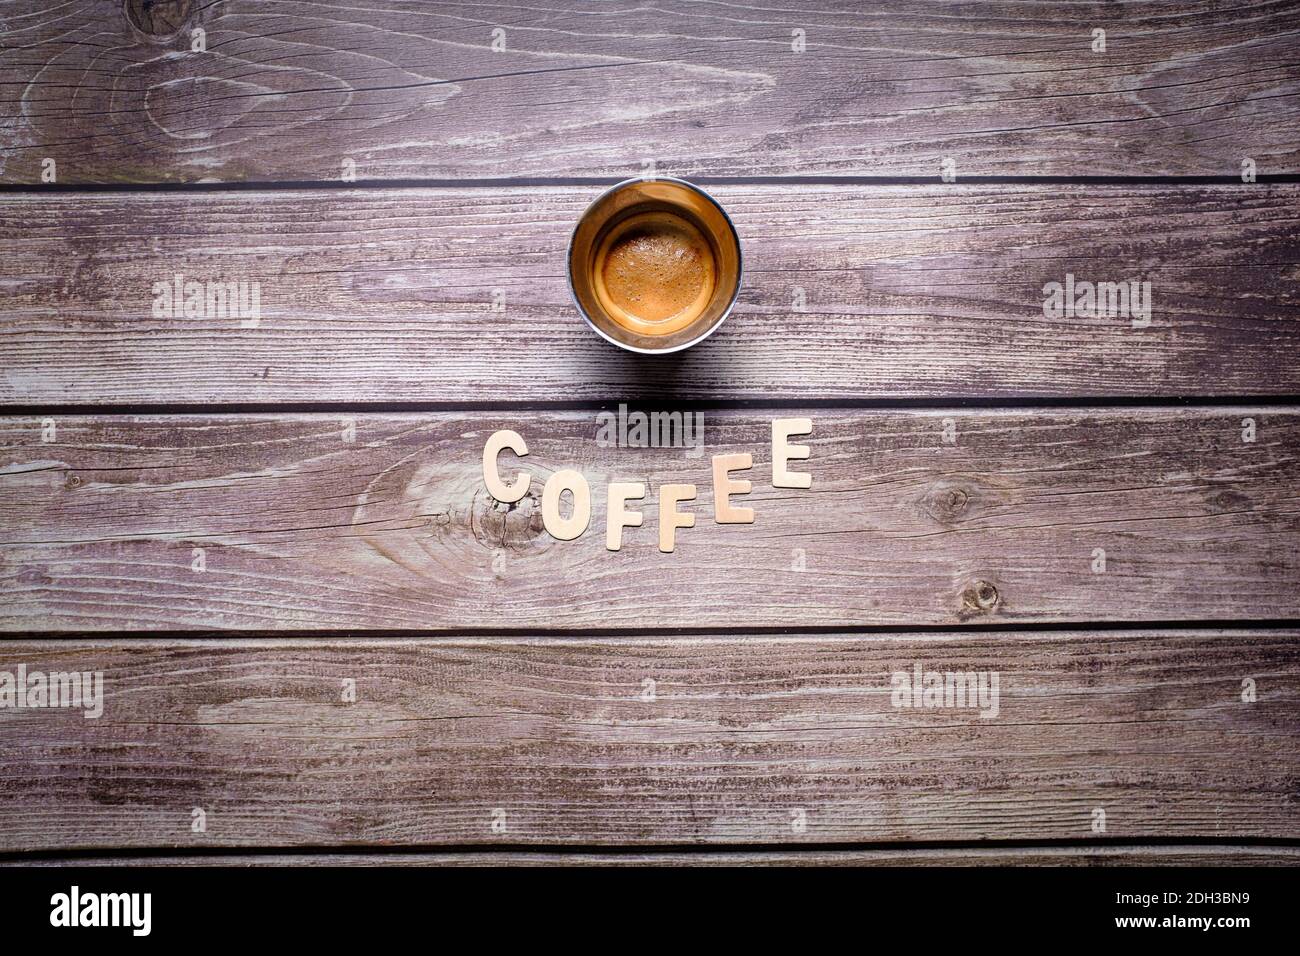 Brown espresso coffee with wooden letters spelling coffee on a wooden table Stock Photo